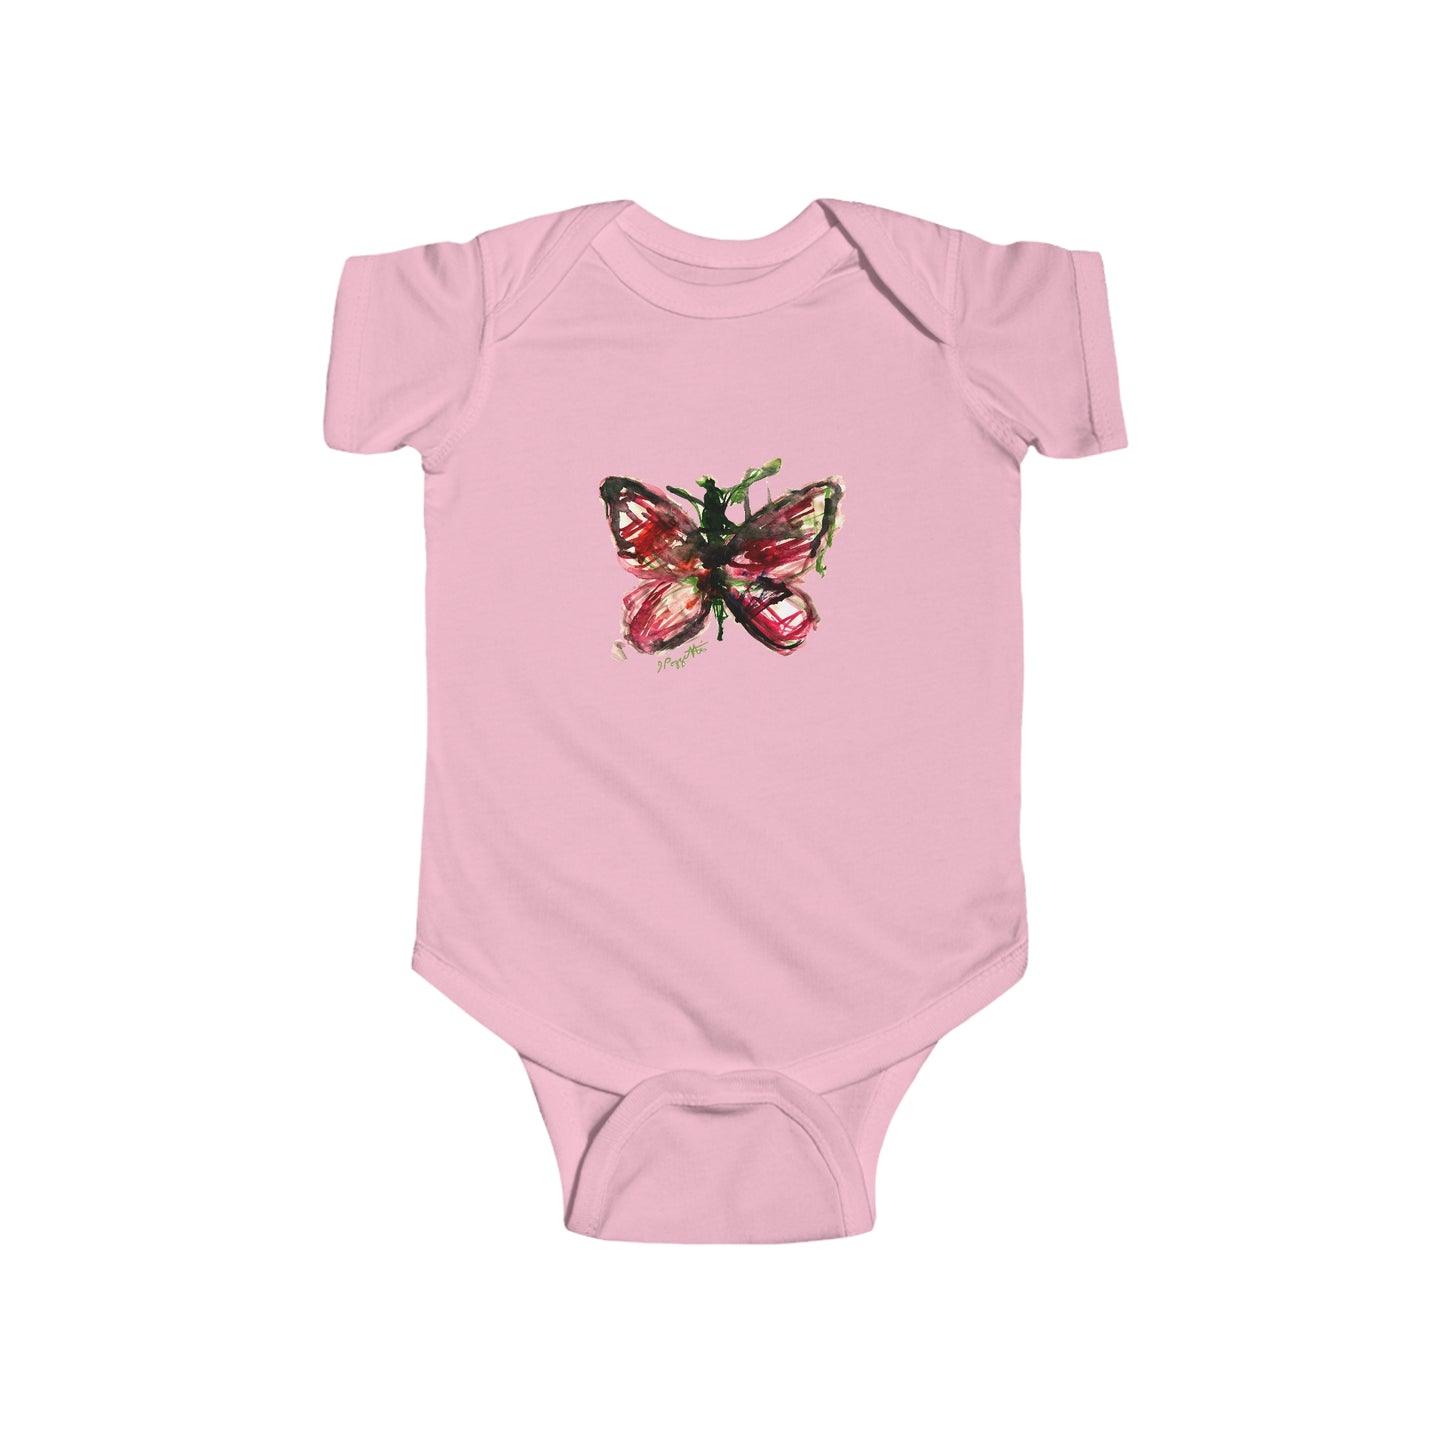 Baby Onesie with Butterfly Design